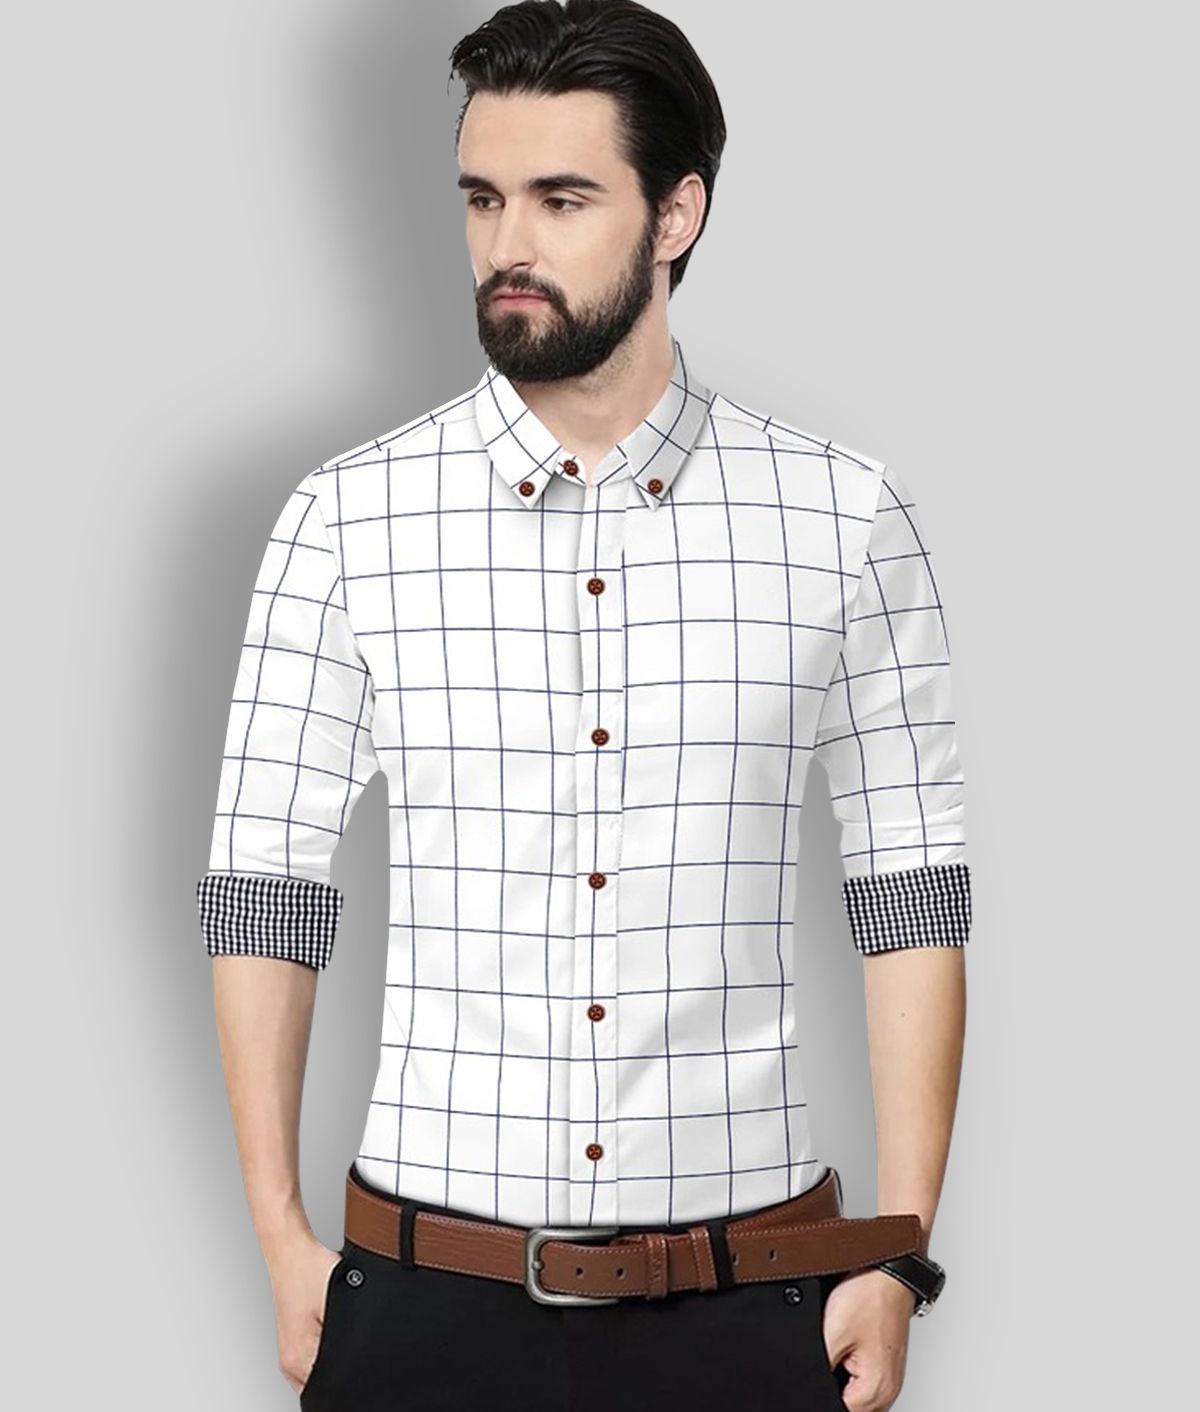     			P&V CREATIONS - White Cotton Blend Regular Fit Men's Casual Shirt (Pack of 1)